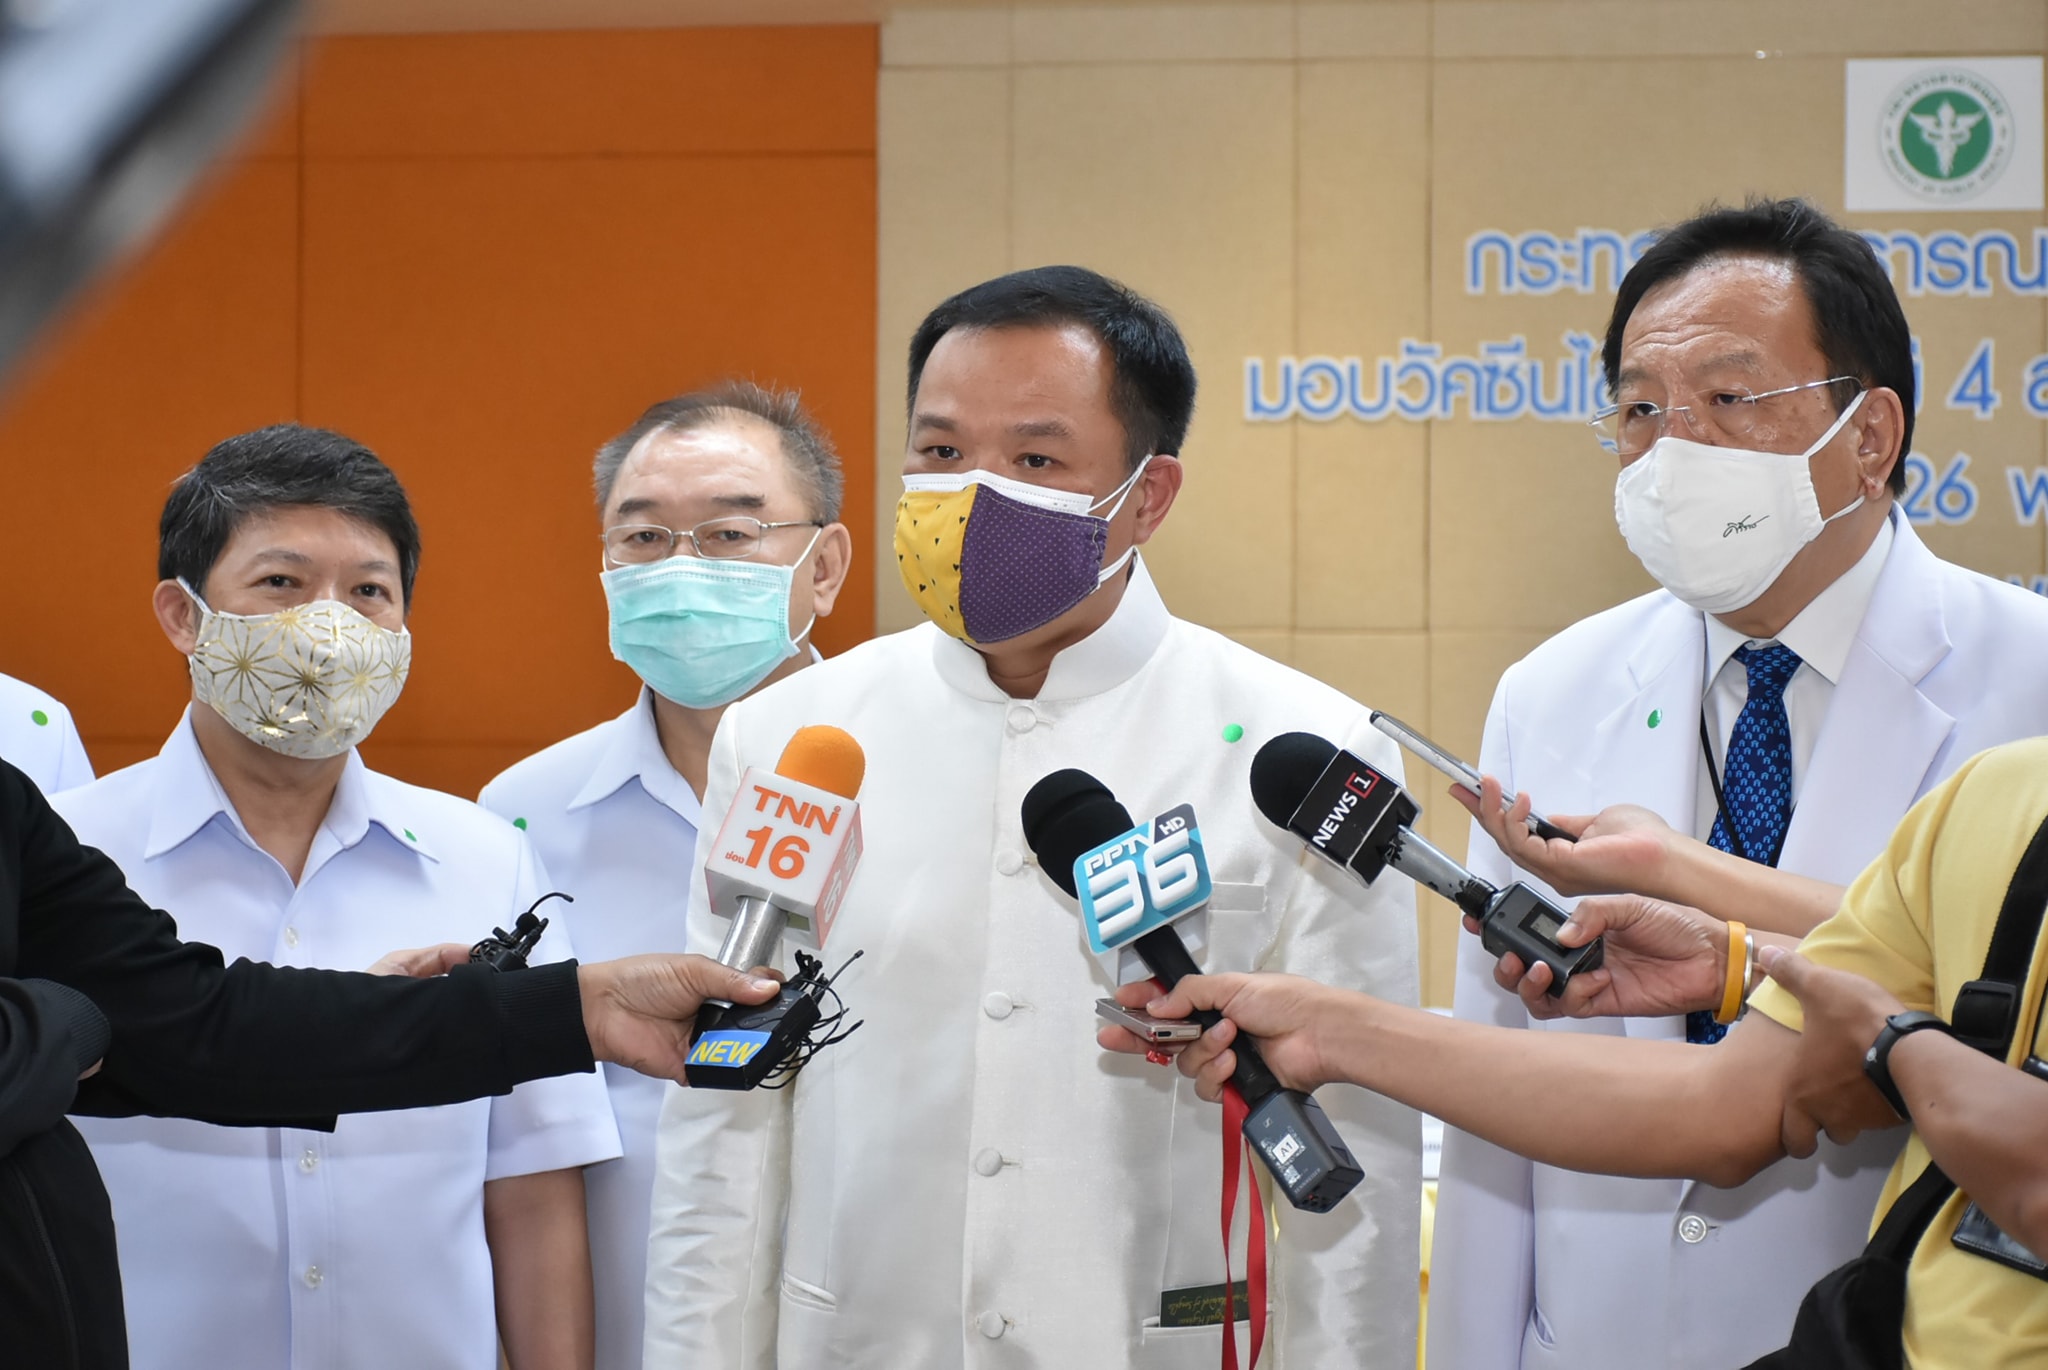 Public Health Minister Anutin Charnvirakul, at center, is being interviewed by the media. Photo: Department of Disease Control / Facebook
